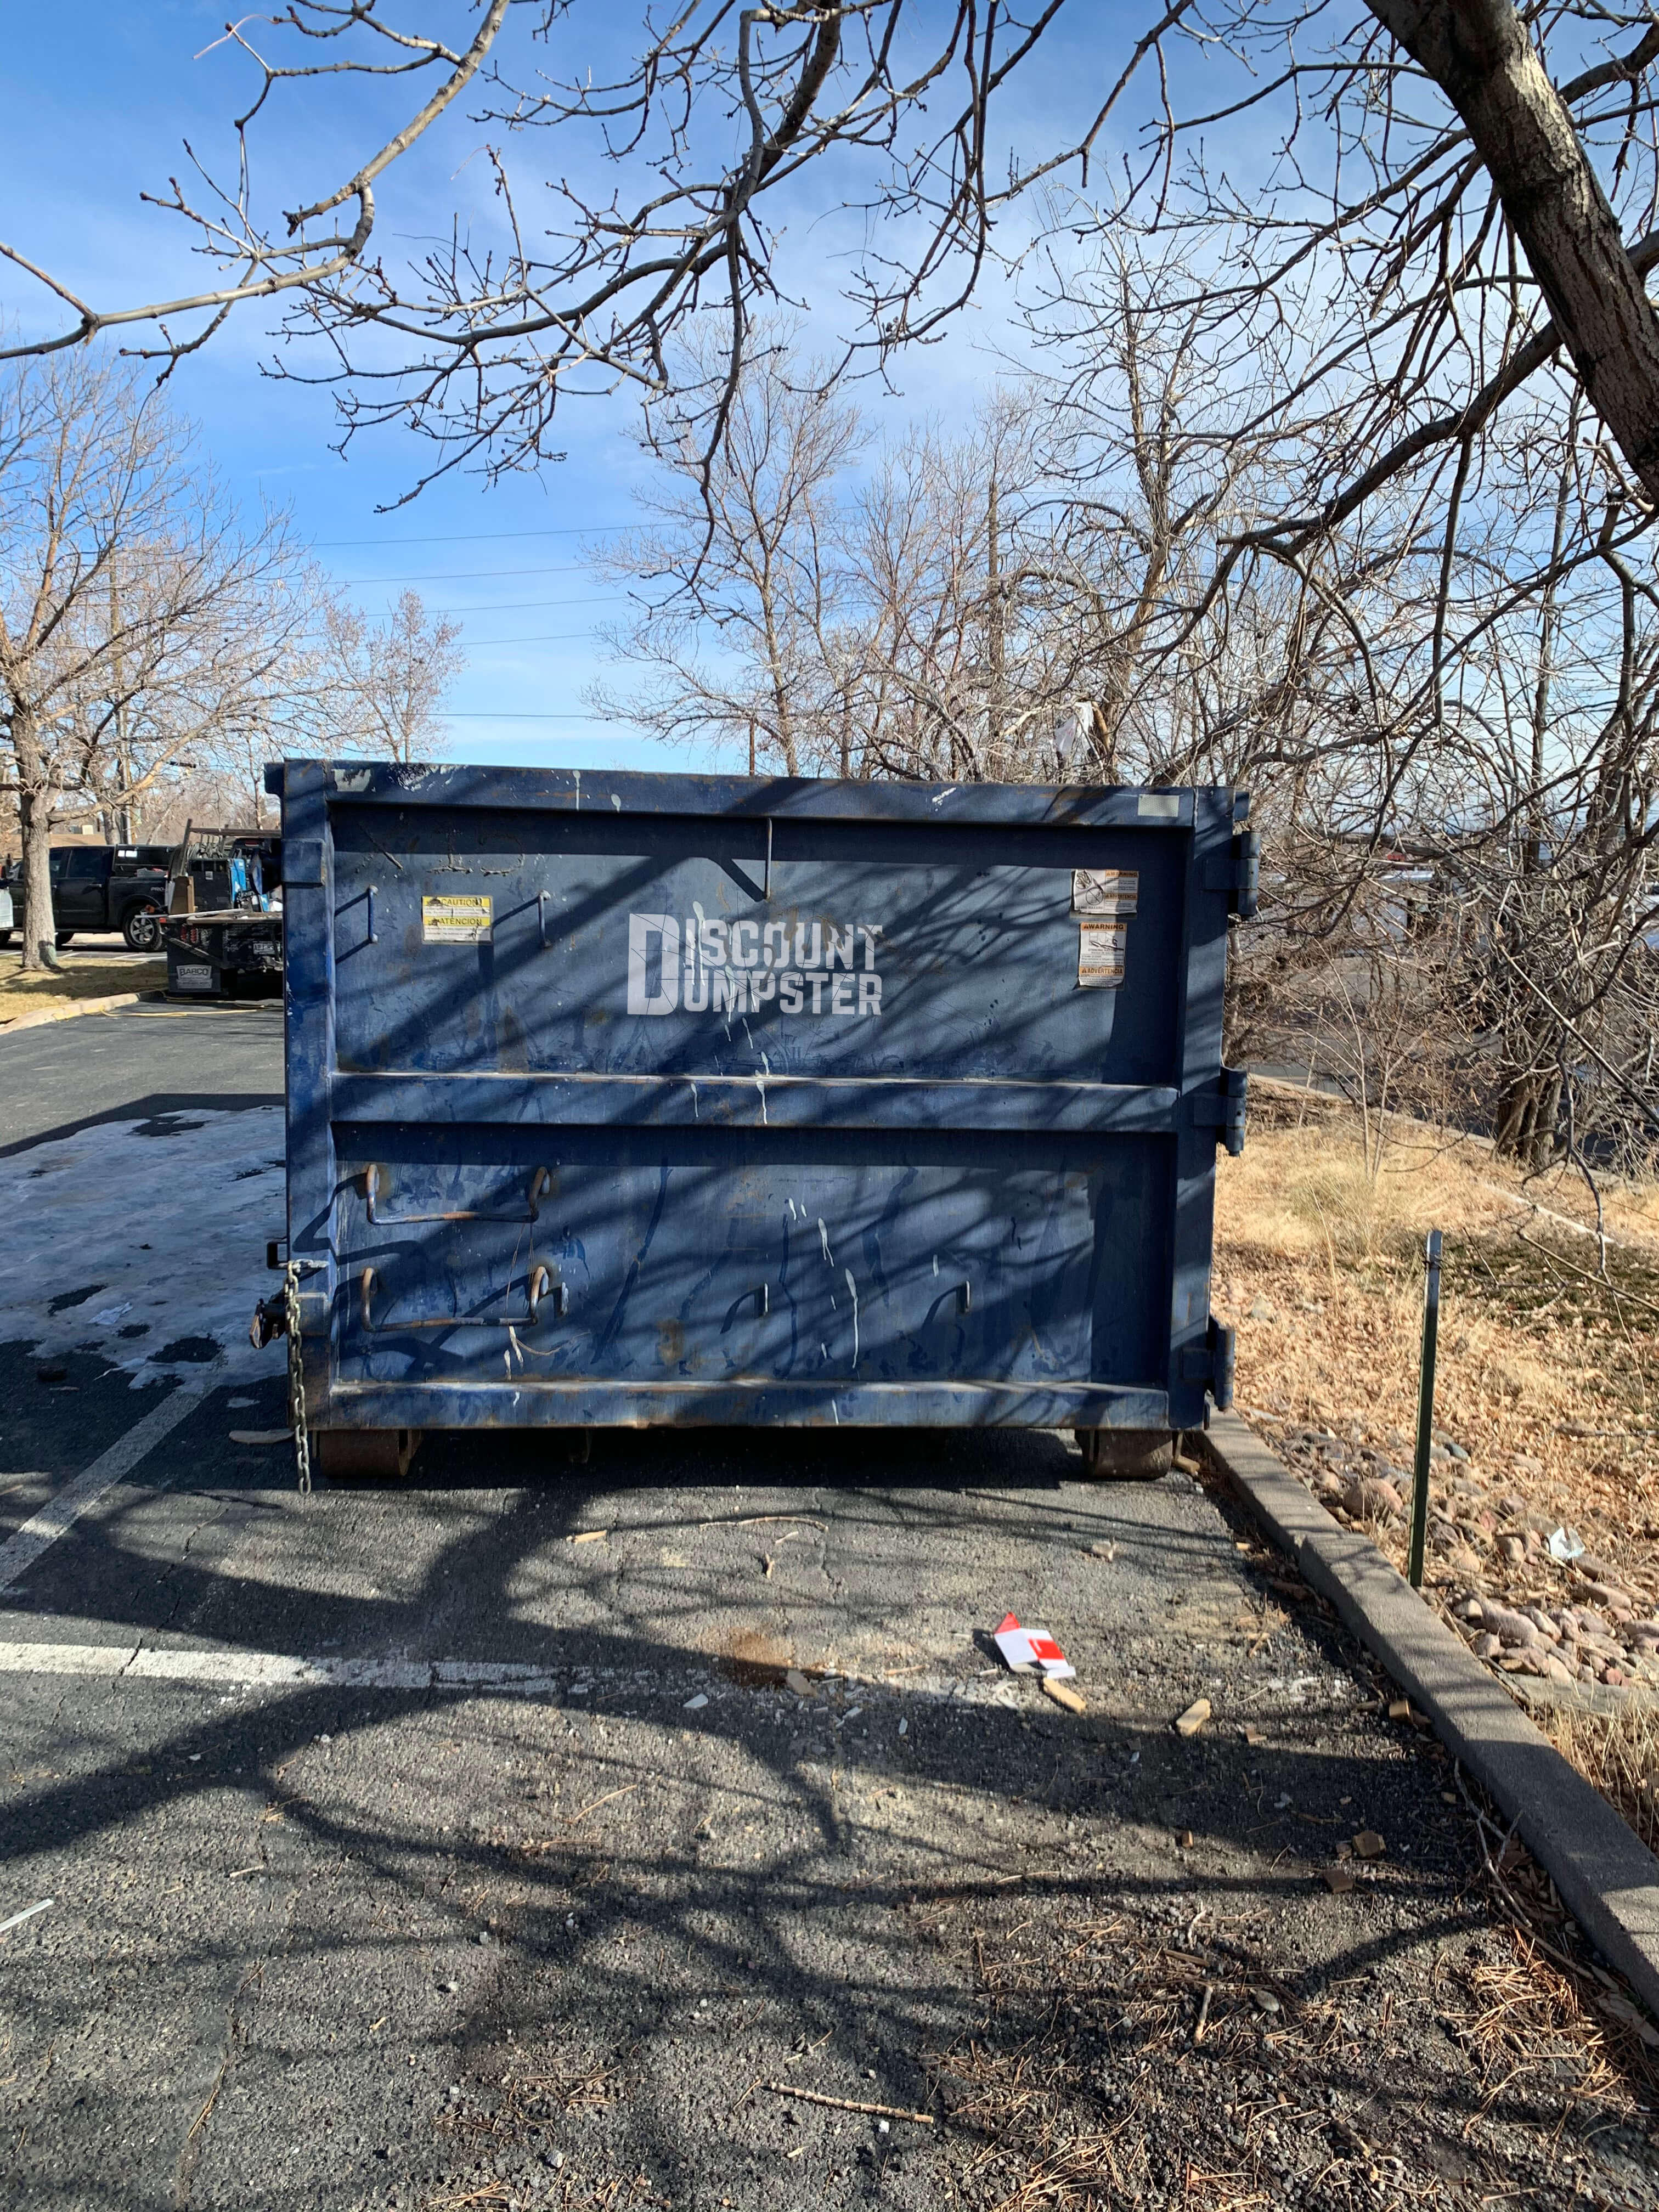 Discount dumpster fits perfectly in your waste removal plan in chicago il